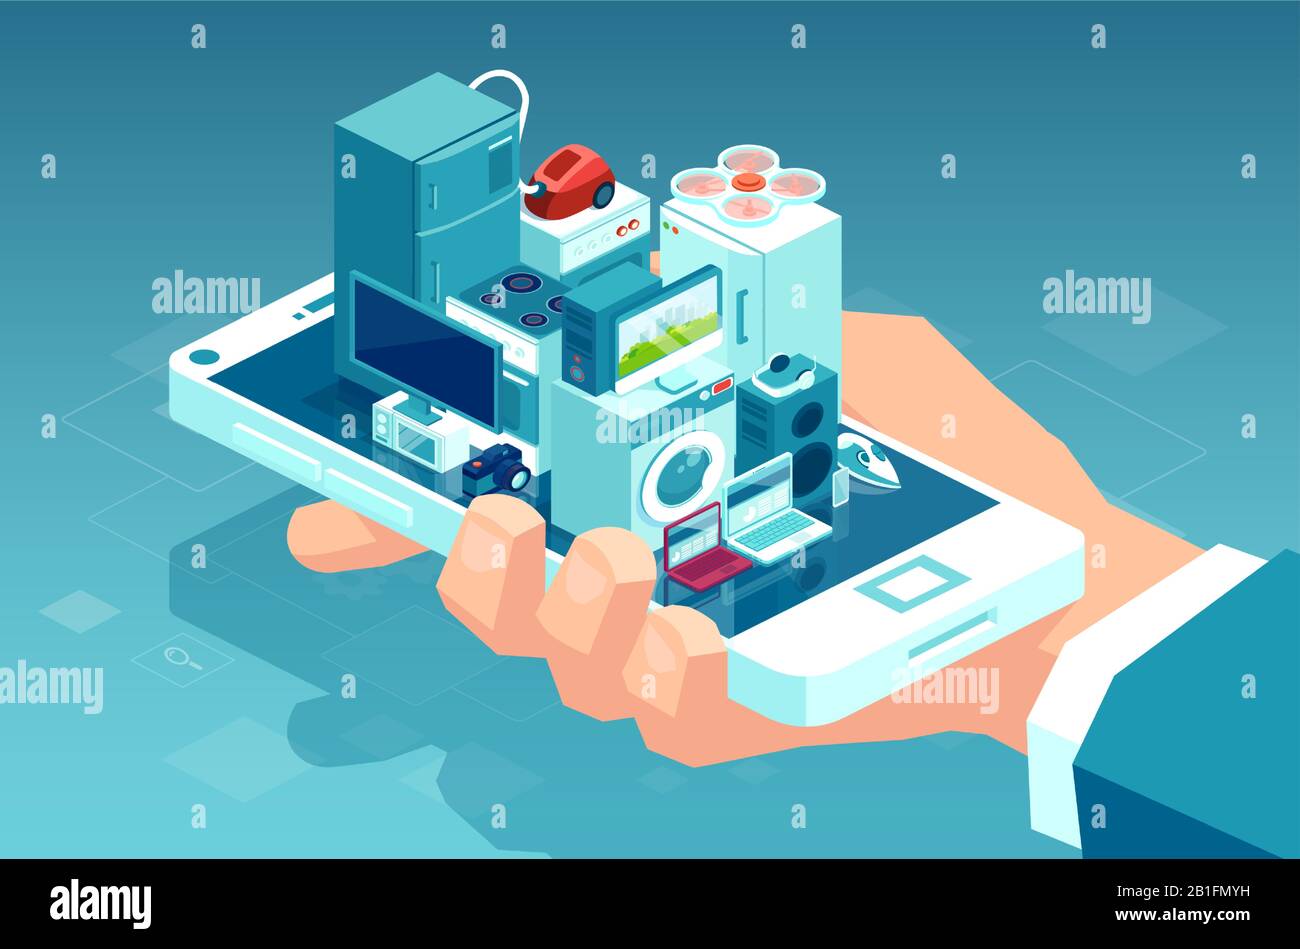 Vector of a man holding smartphone with consumer electronics products and home appliances buying online using mobile app for delivery Stock Vector